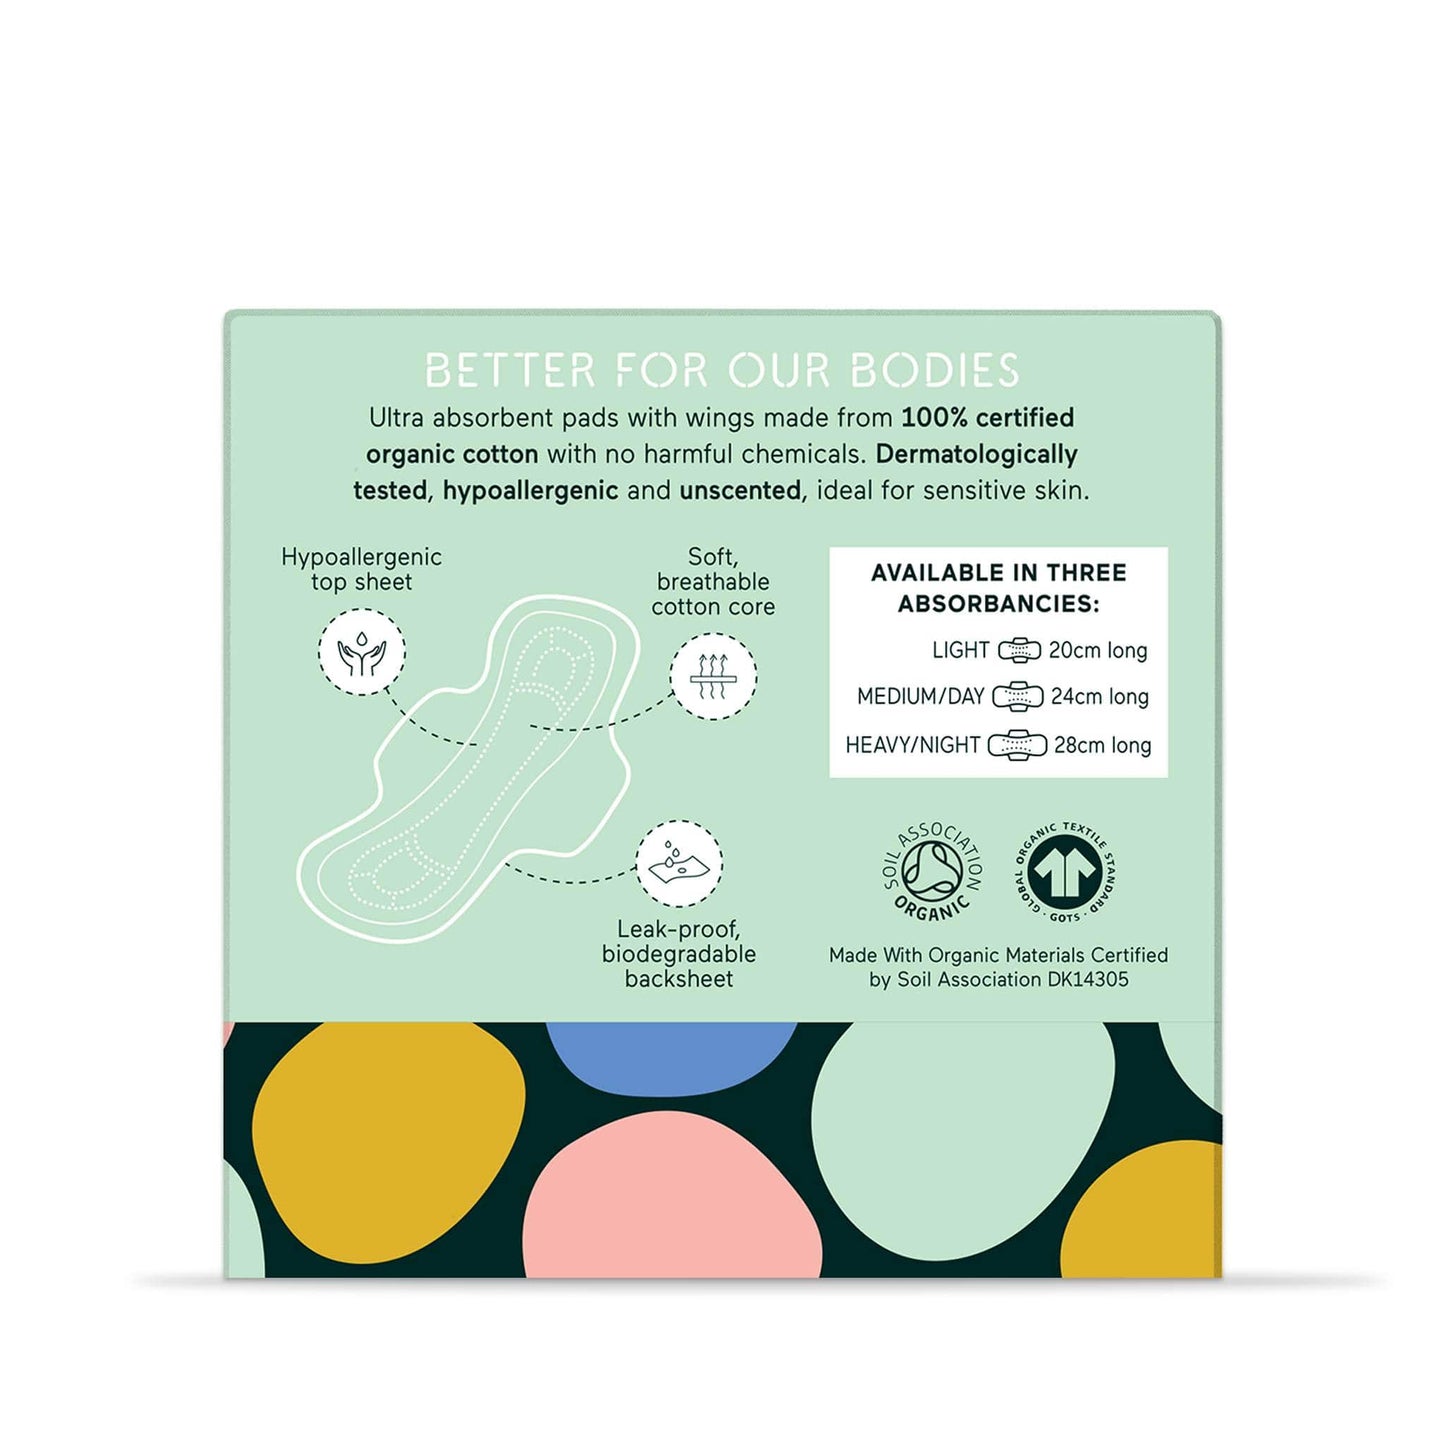 & SISTERS Feminine Pads & Protectors Organic Cotton Period Pads with Wings - & SISTERS